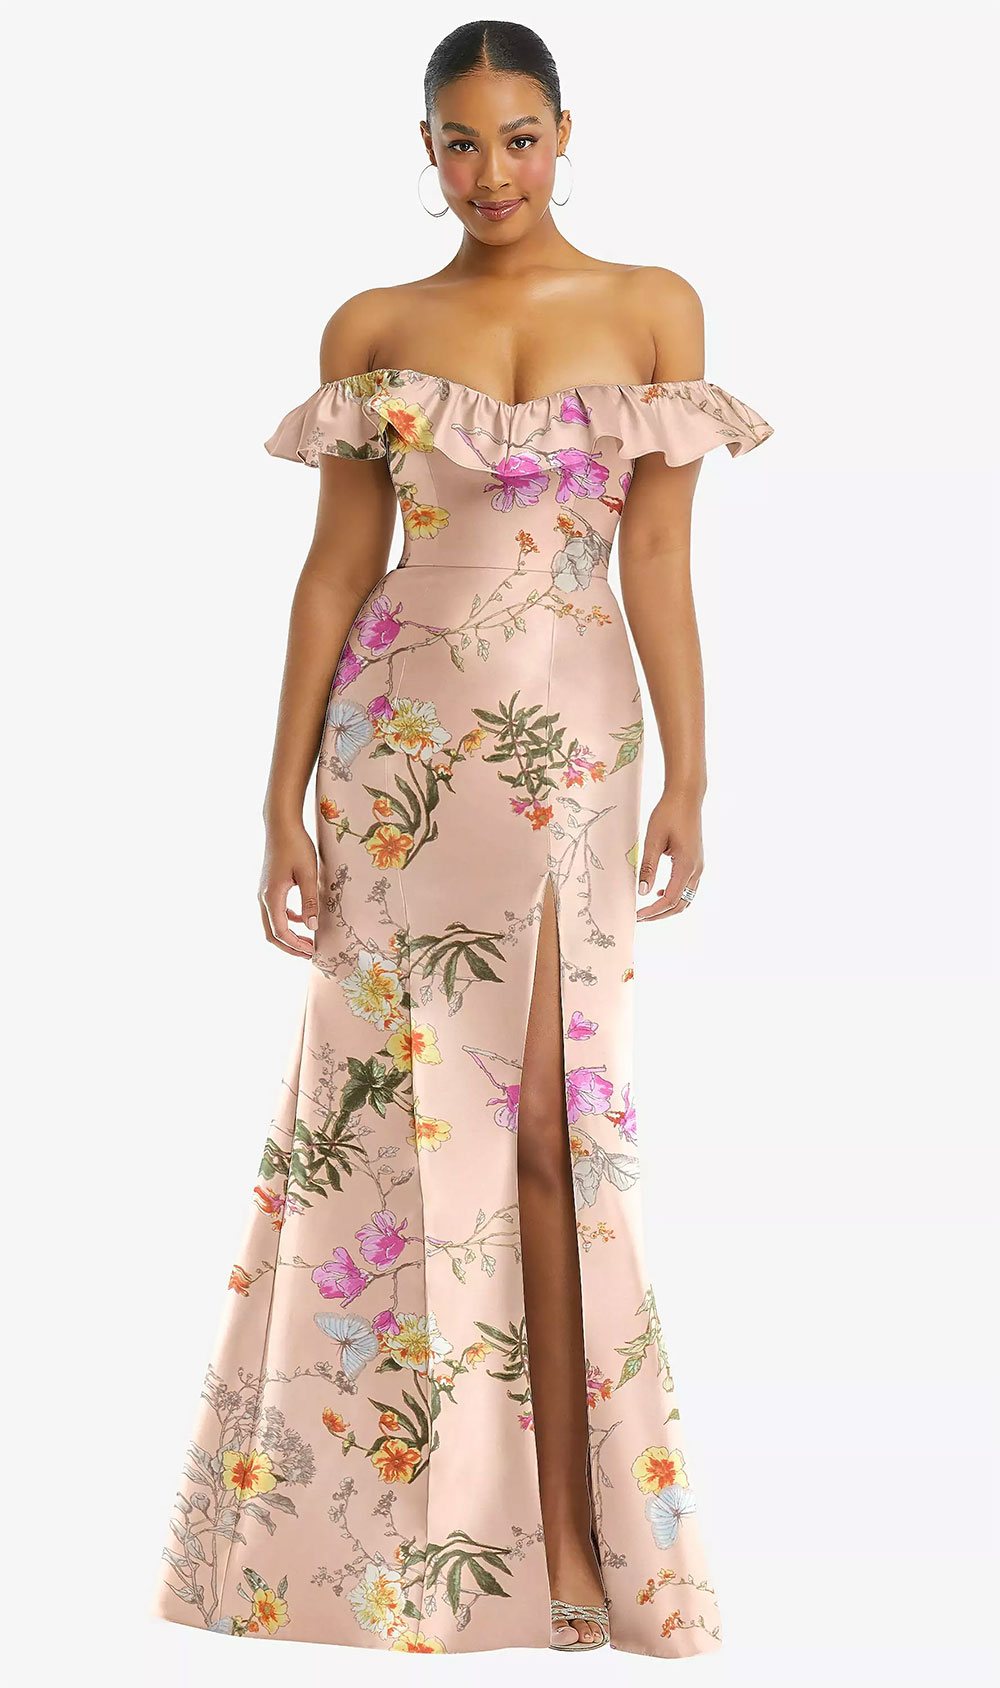 blush botanical dress with off the shoulder ruffle neckline and butterfly details